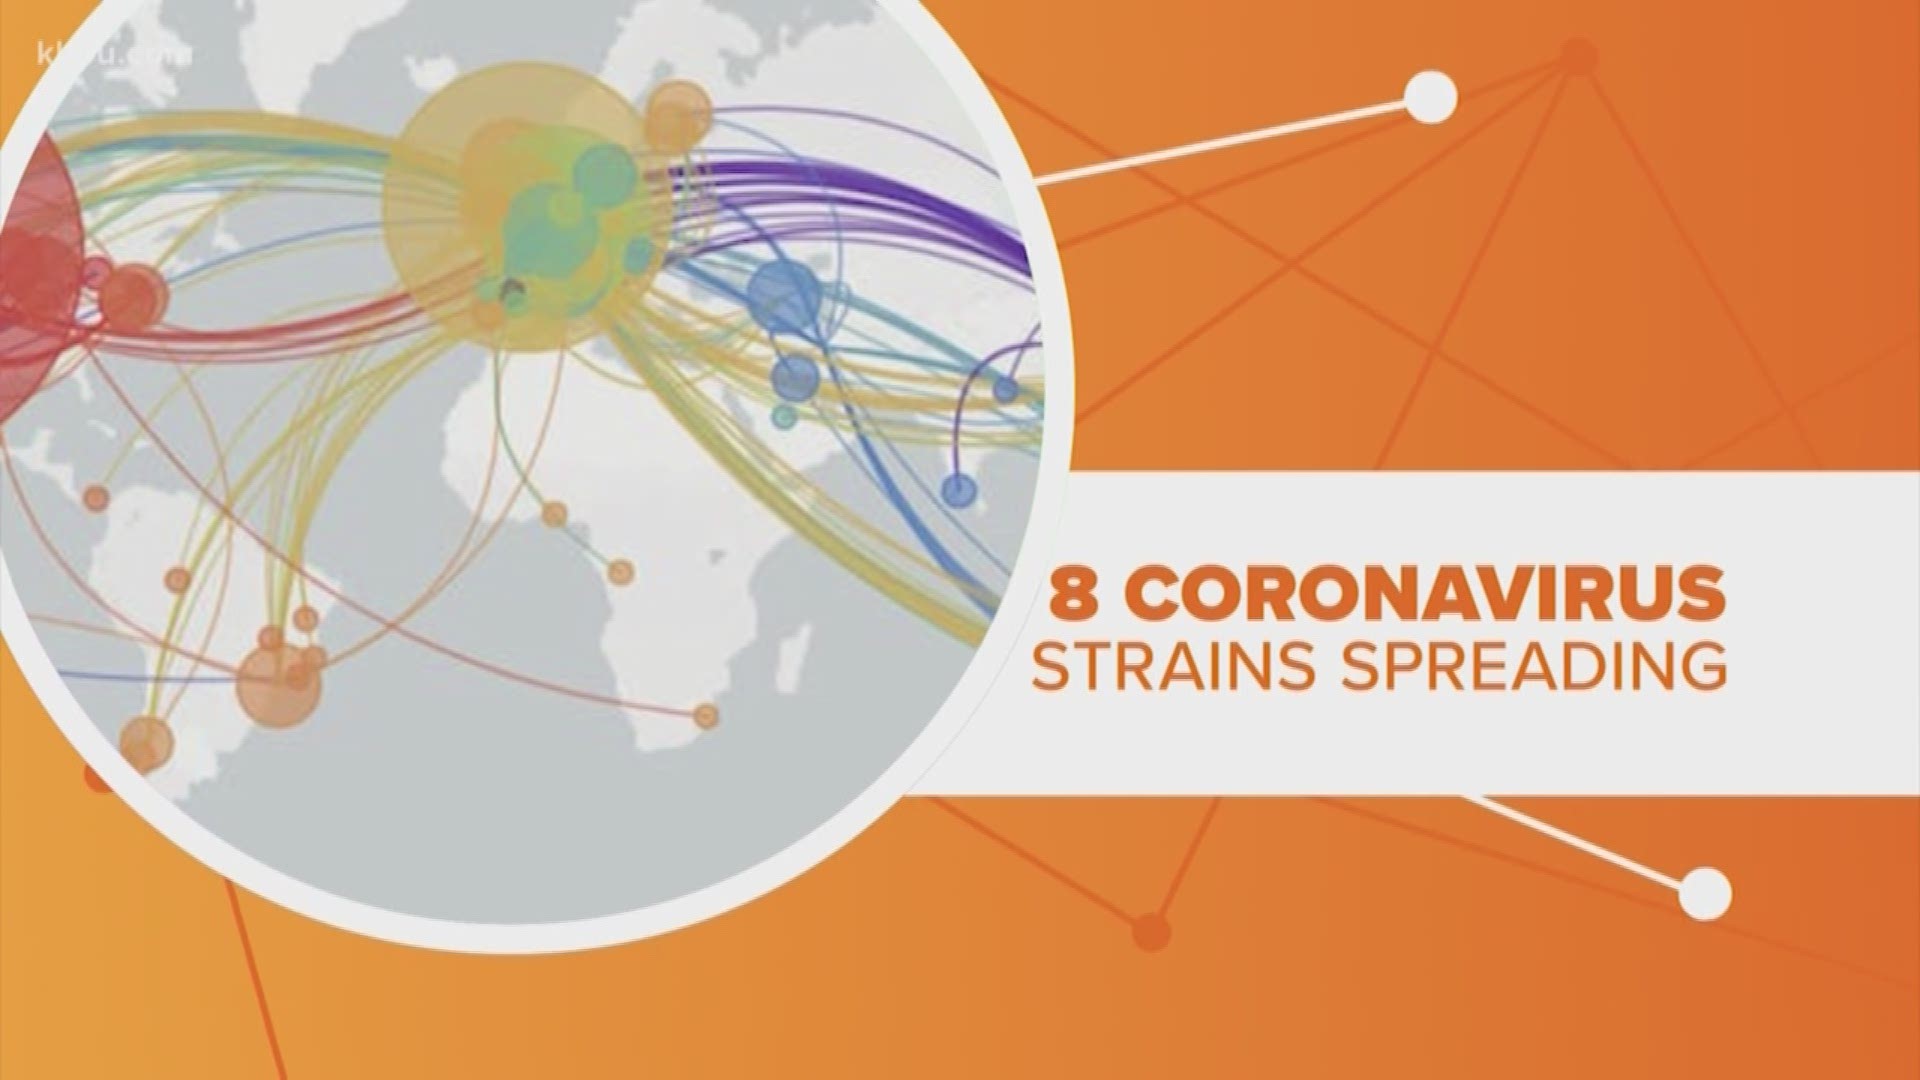 There is still so much we don't know about the coronavirus and how it spreads. But researchers are working hard finding answers. Marcelino Benito connects the dots.